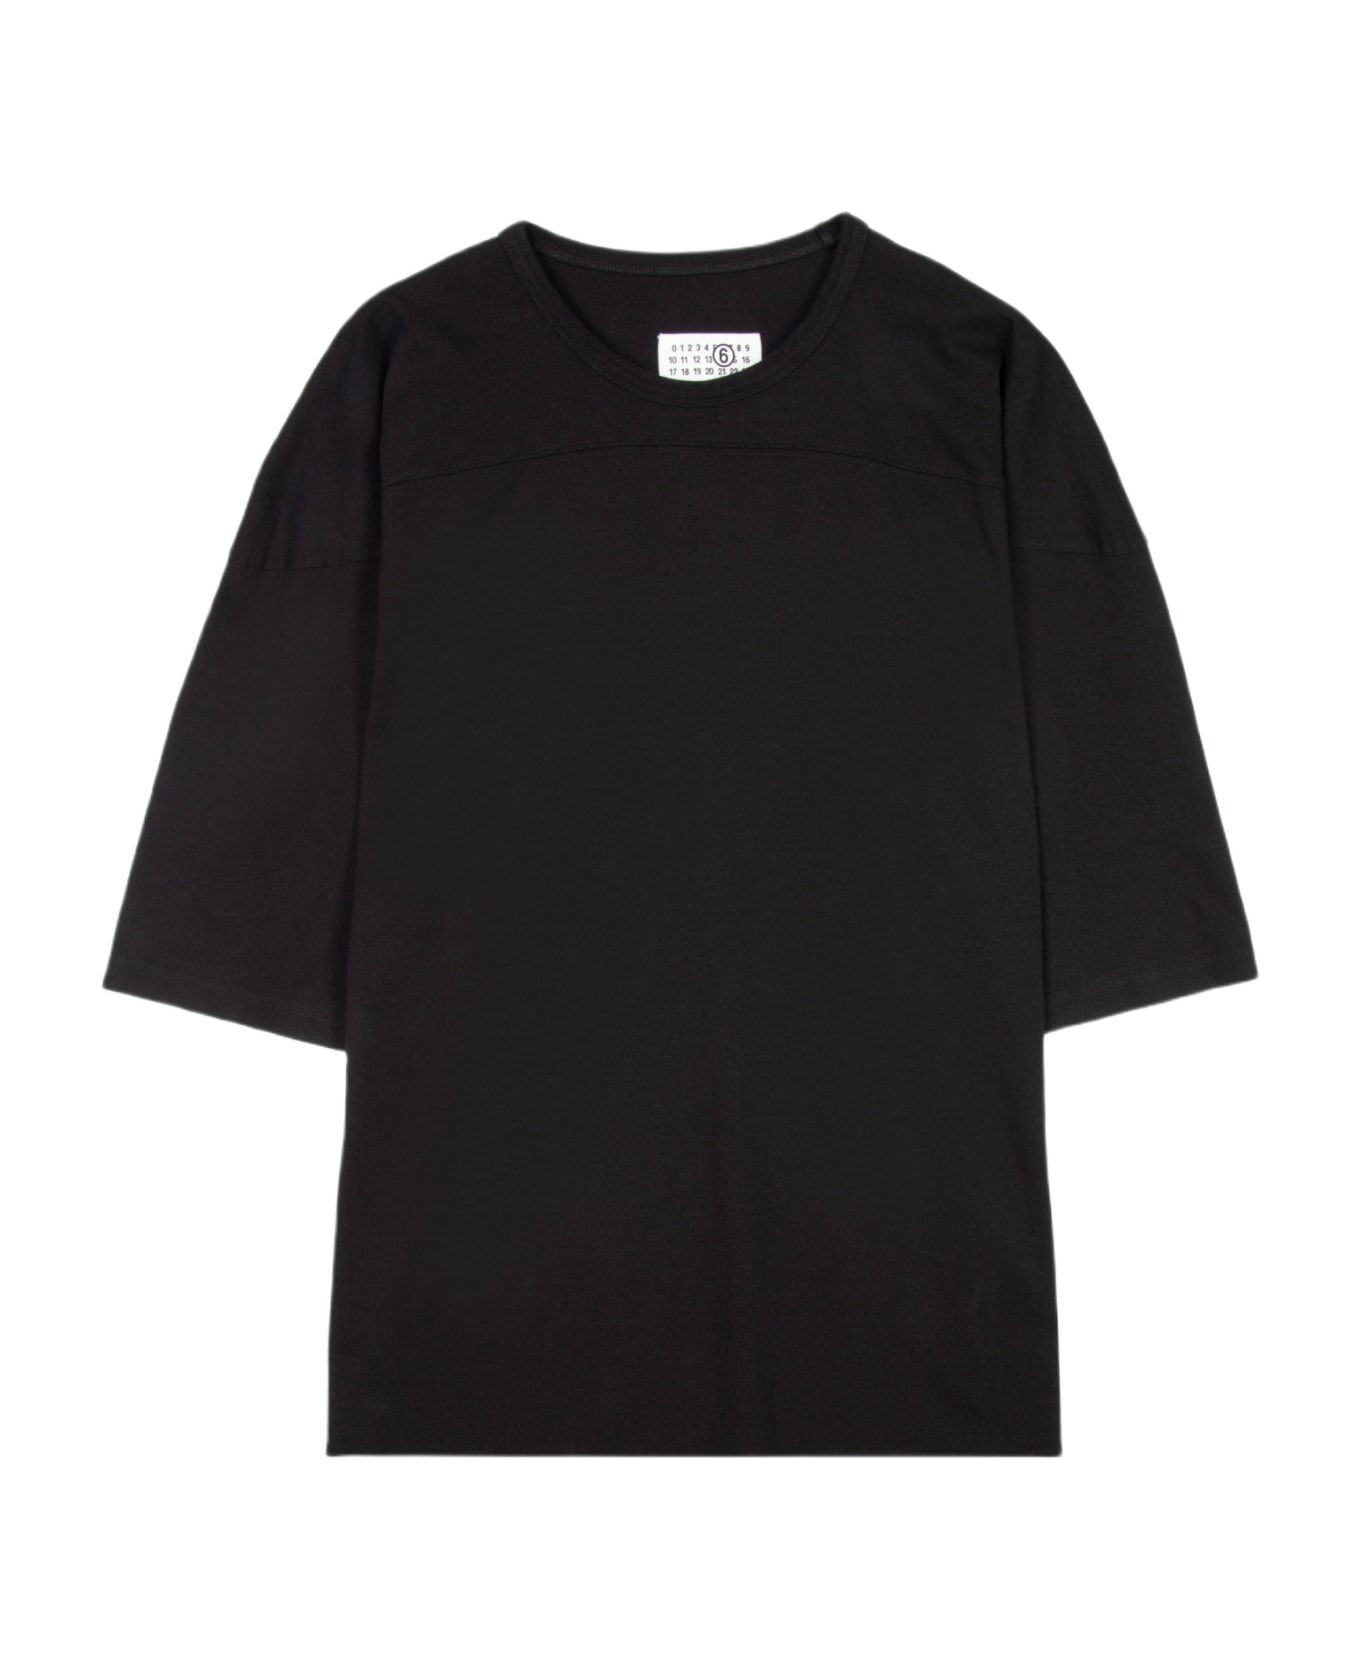 MM6 Maison Margiela T-shirt Black Relaxed T-shirt With 3/4 Sleeves Lenght - Nero シャツ